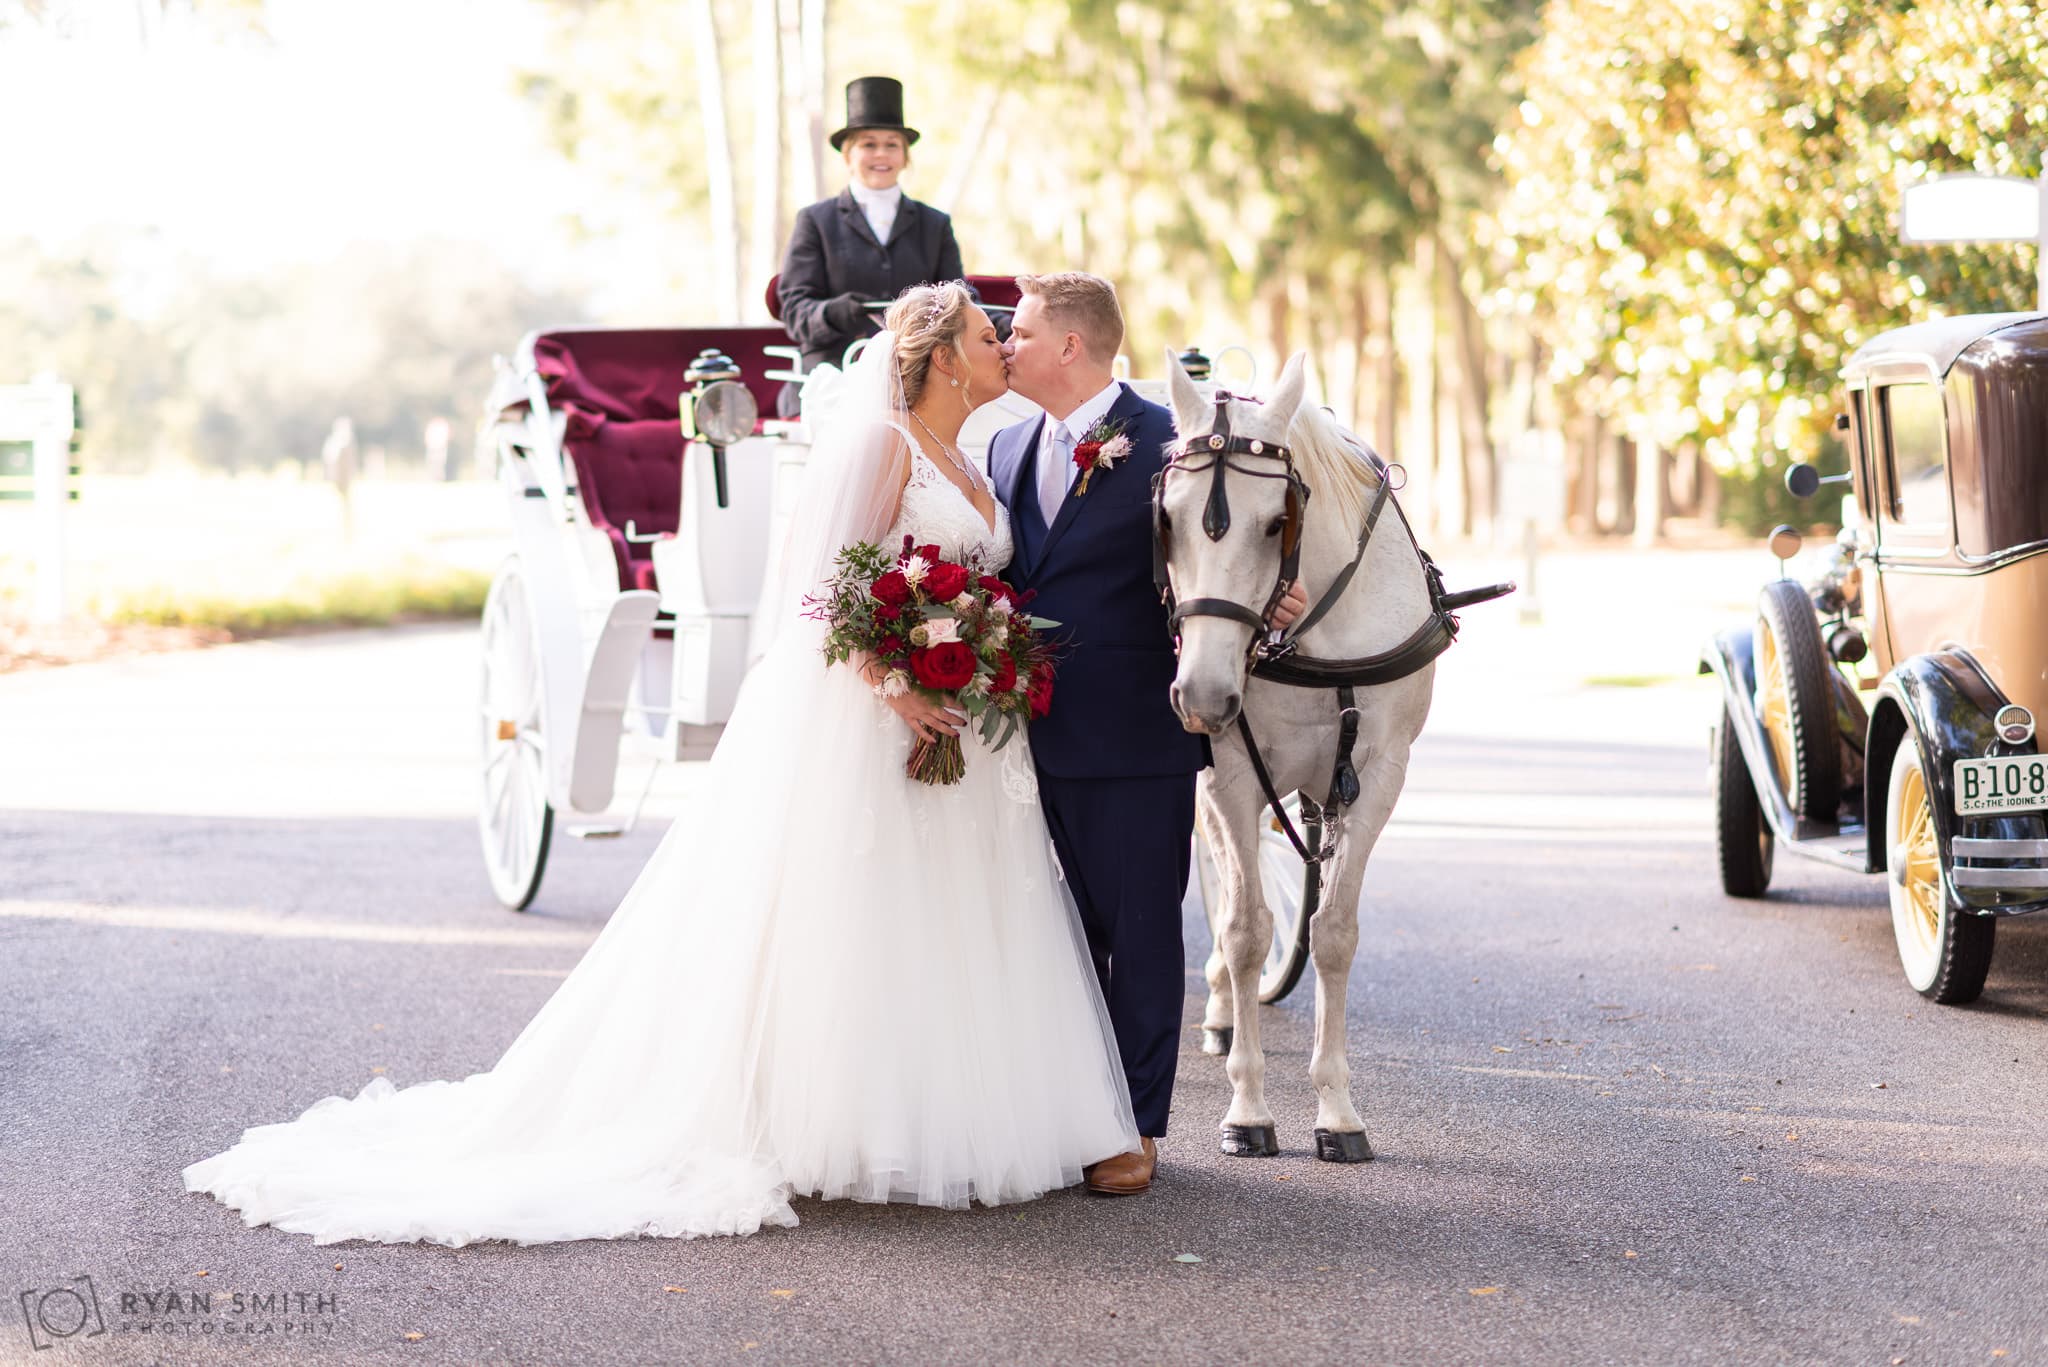 Kiss with the carriage horse